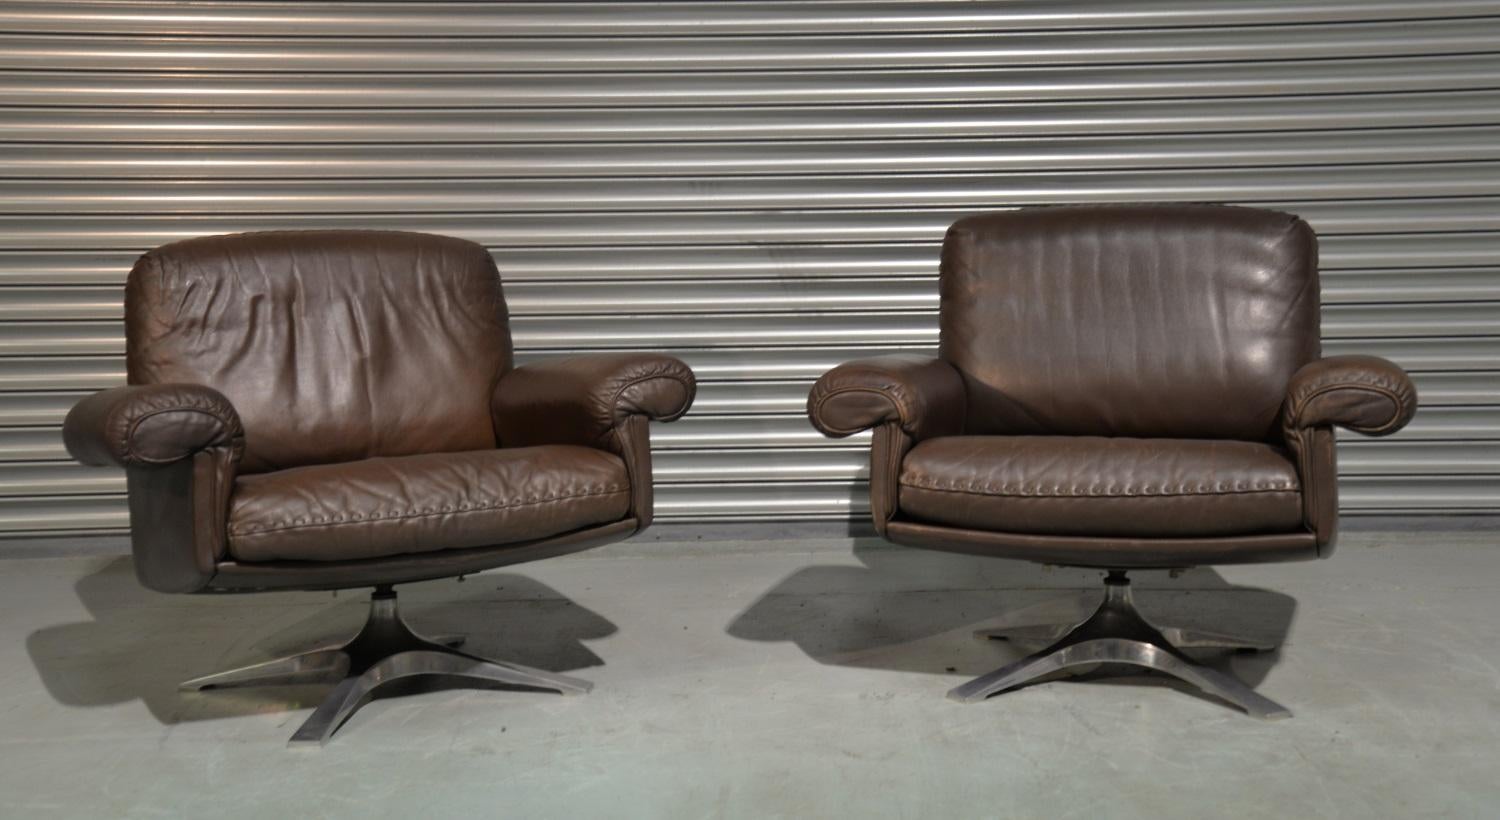 Discounted airfreight for our US and International Customers ( from 2 weeks door to door)

We are delighted to bring to you a pair of vintage 1970s de Sede DS 31 lounge armchairs in soft brown aniline leather with superb whipstitch edge detail.